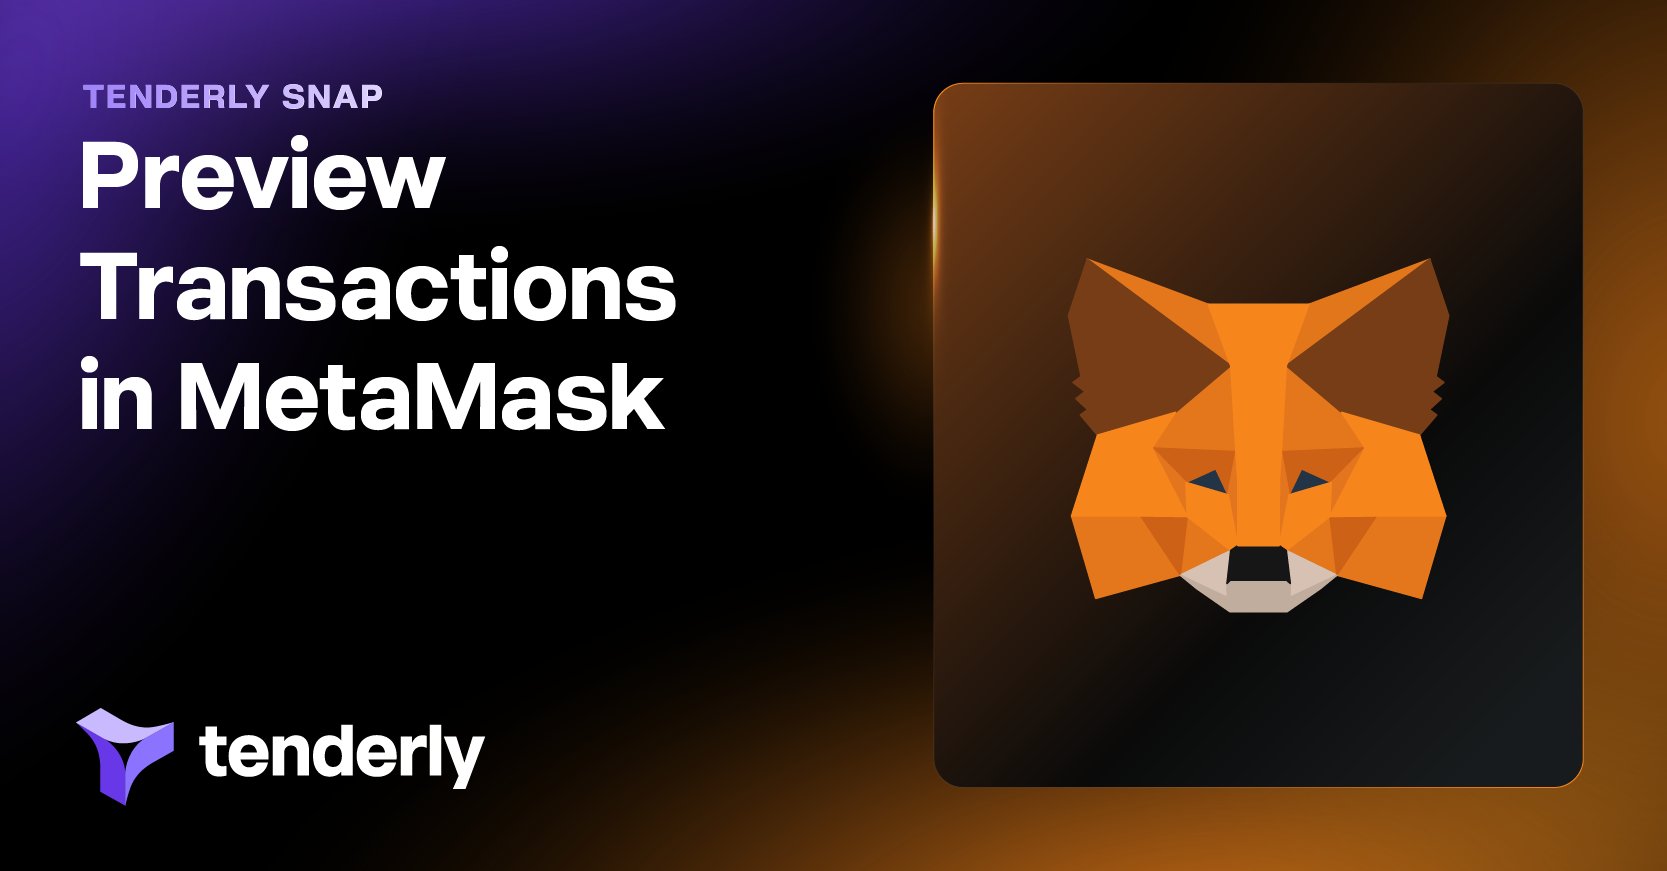 How to preview transactions on MetaMask with Tenderly Snap simulations